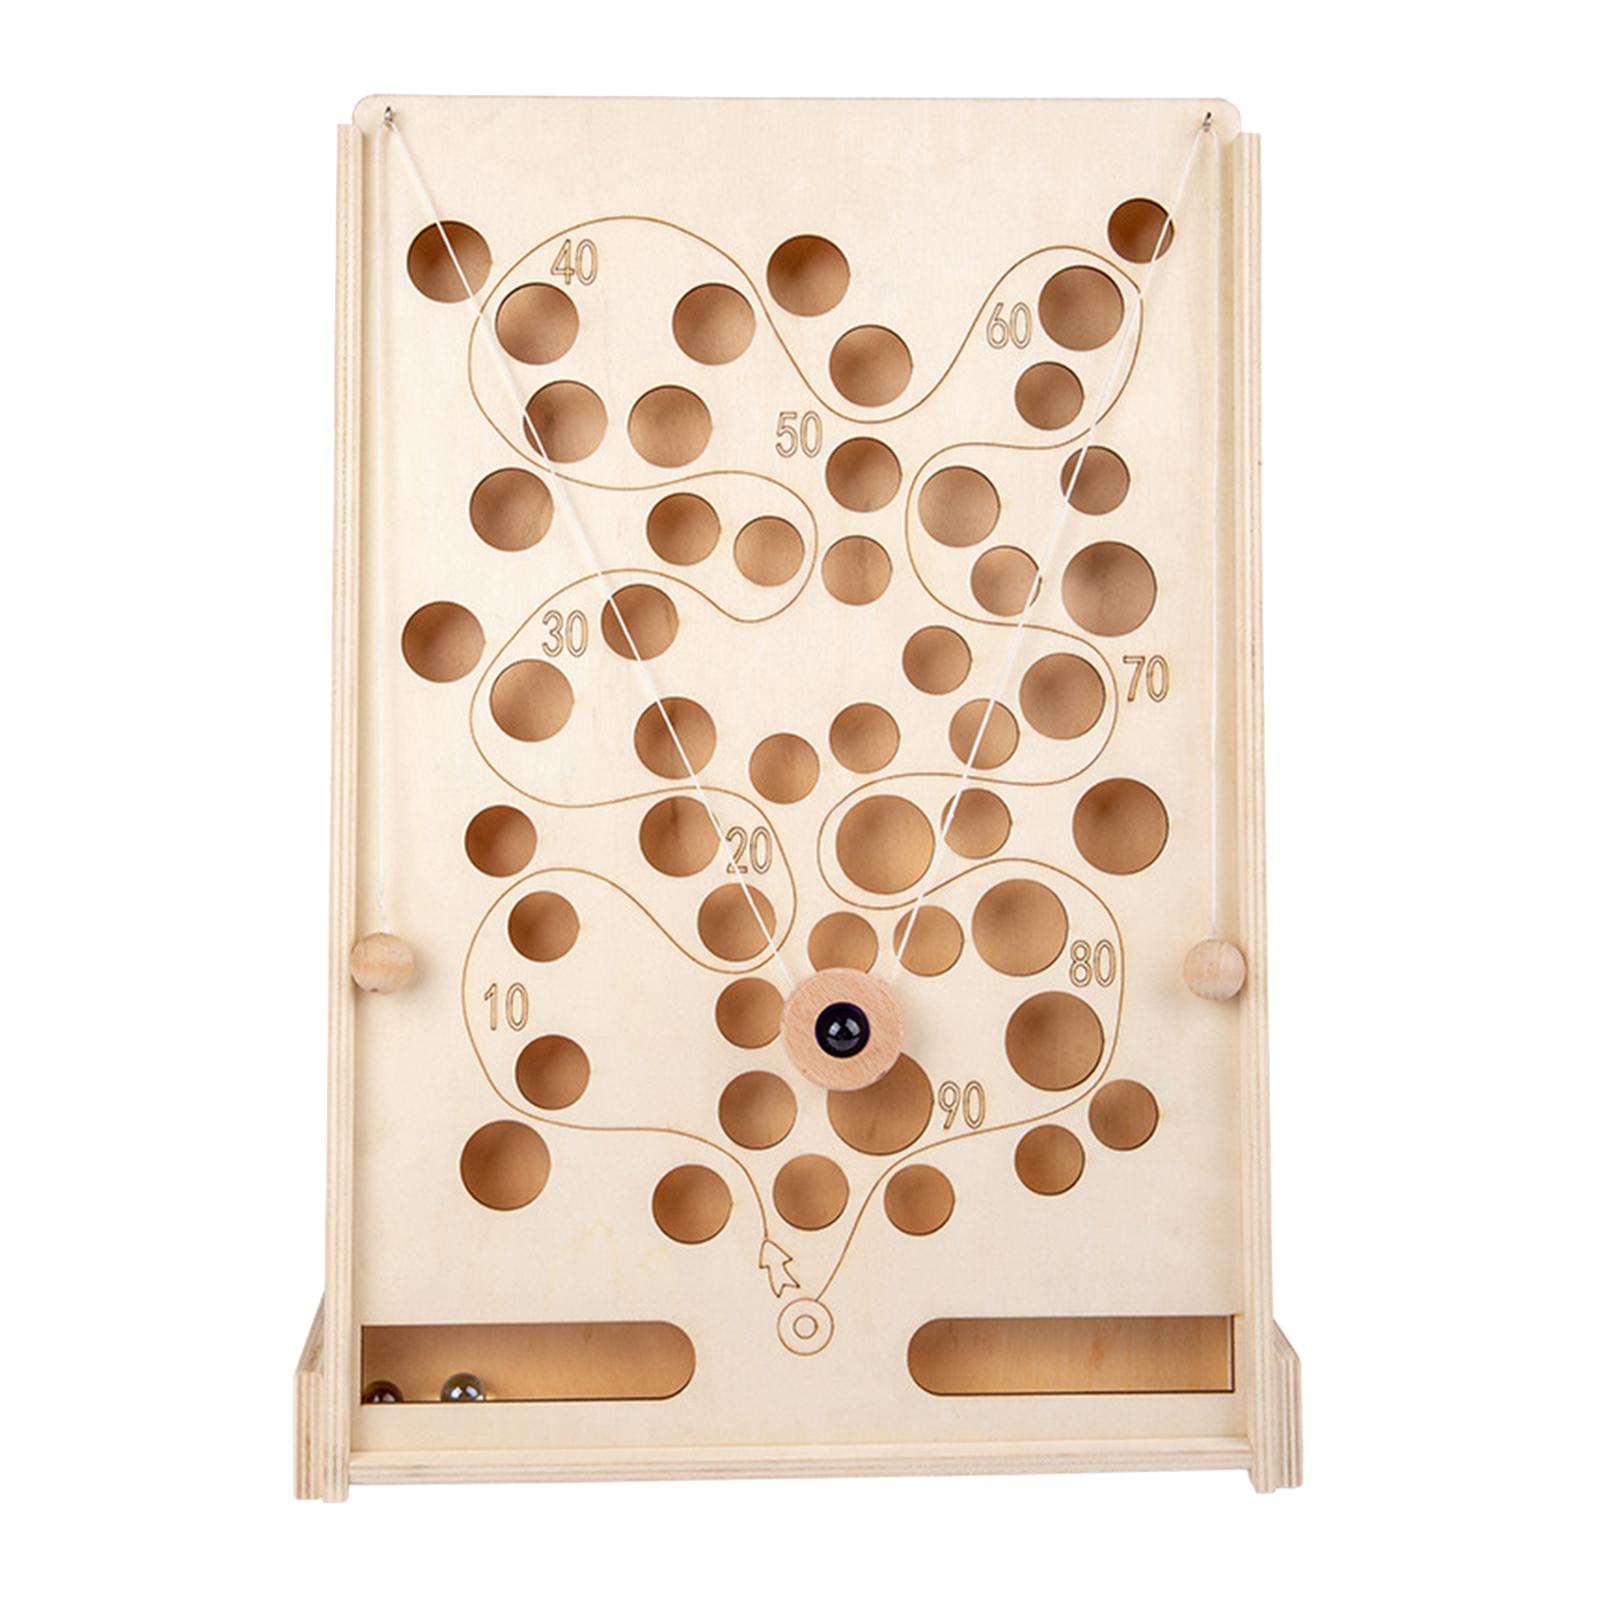 Labyrinth Wooden Maze Game with Three Marbles, 3D Puzzle Game Traditional Board Game for Adults, Boys and Girls